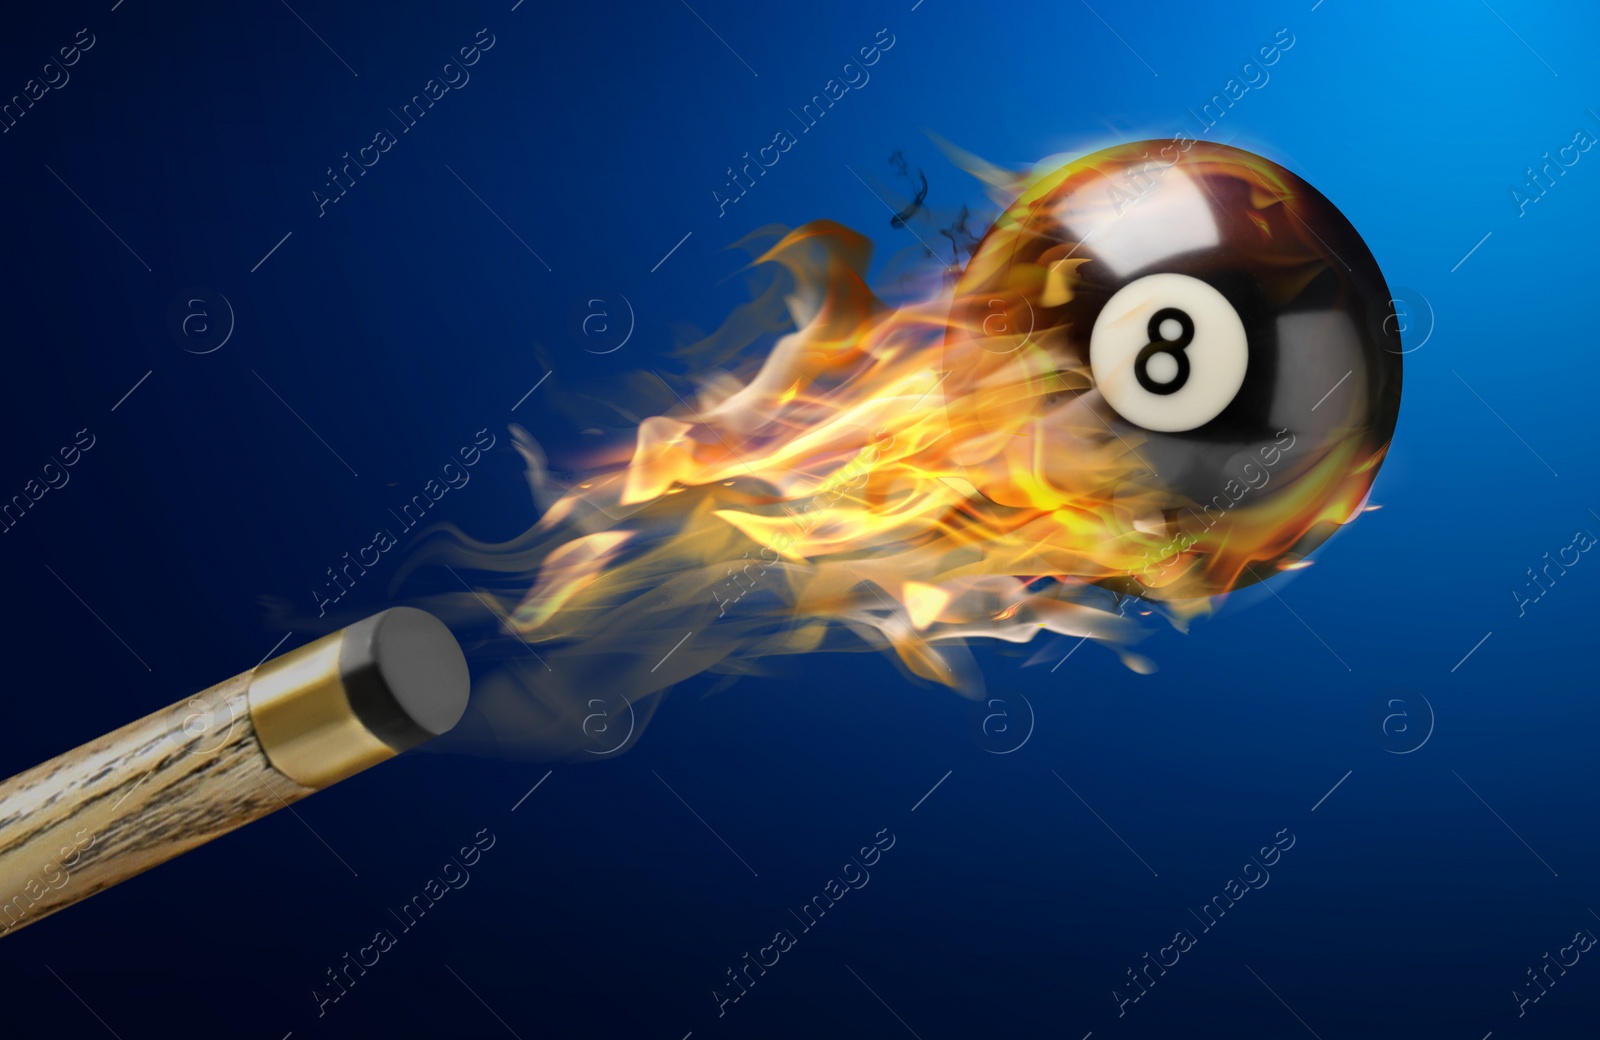 Image of Cue and billiard ball with number 8 in fire flying on color background